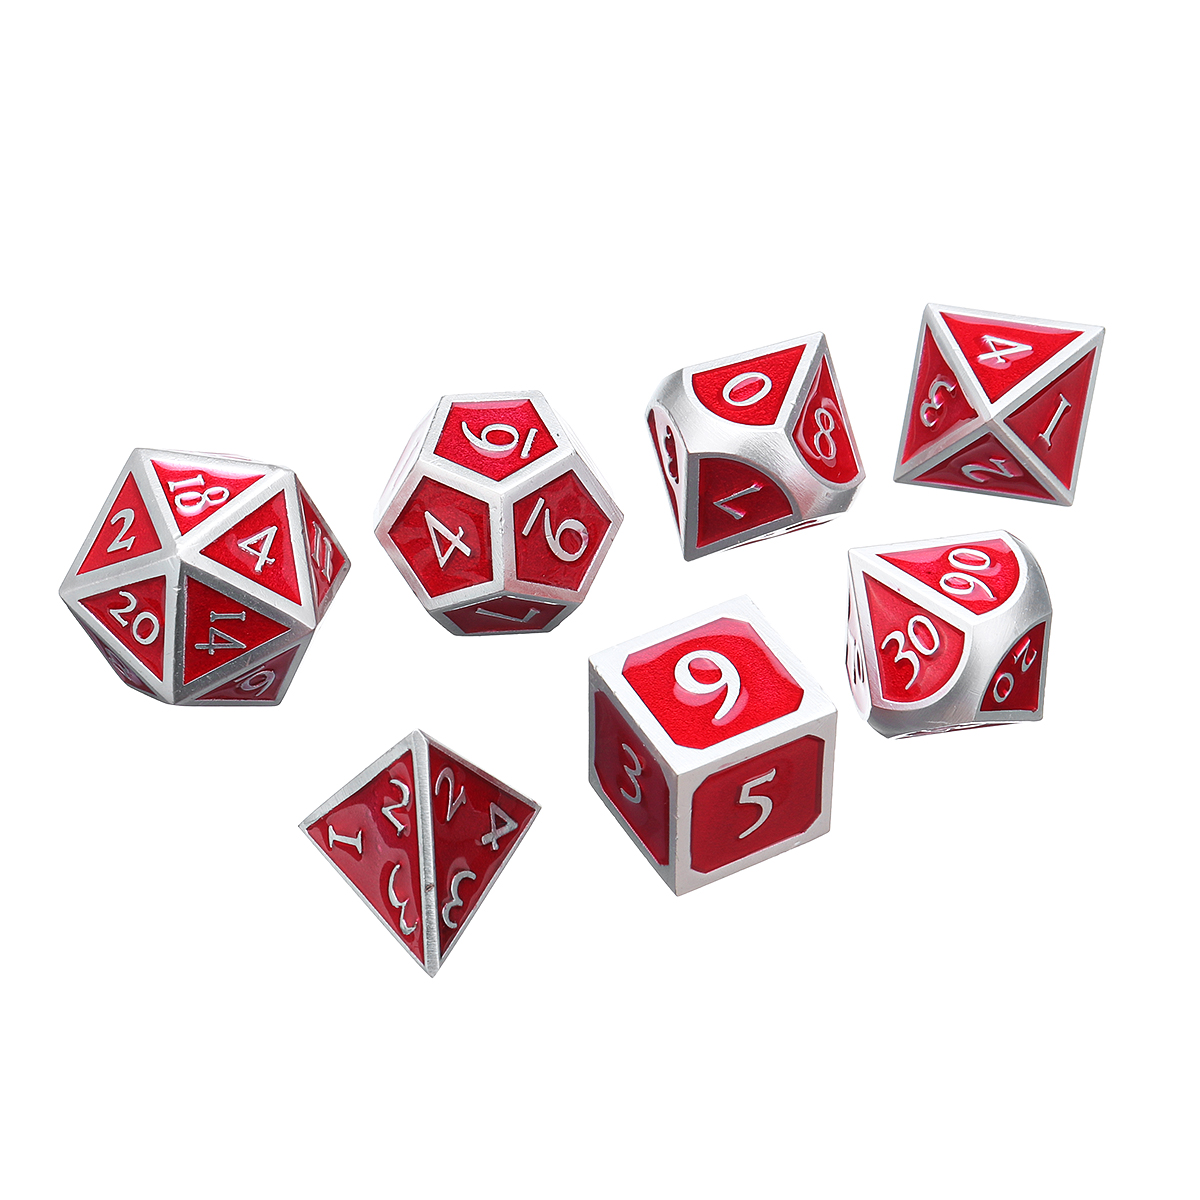 Red-Antique-Color-Solid-Metal-Polyhedral-Dices-Role-Playing-RPG-Gadget-7-Dice-Set-With-Bag-1425967-2